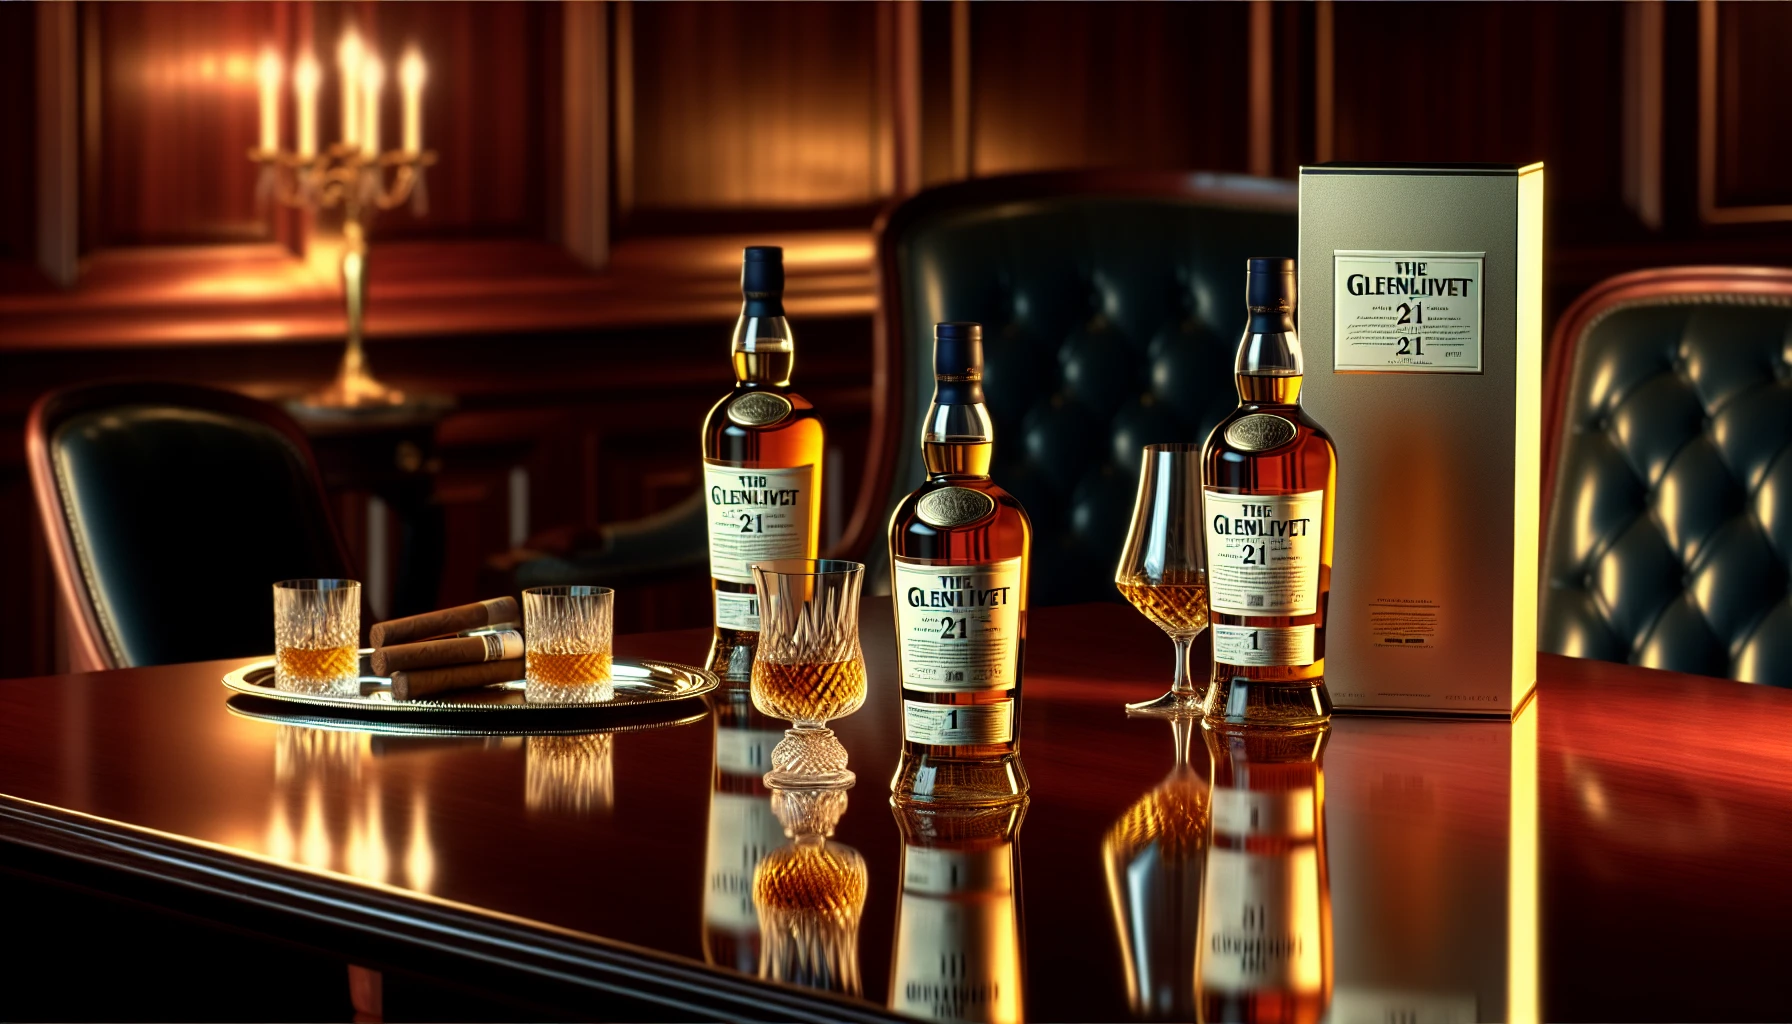 A luxurious setting with The Glenlivet 21 Year Old as the centerpiece